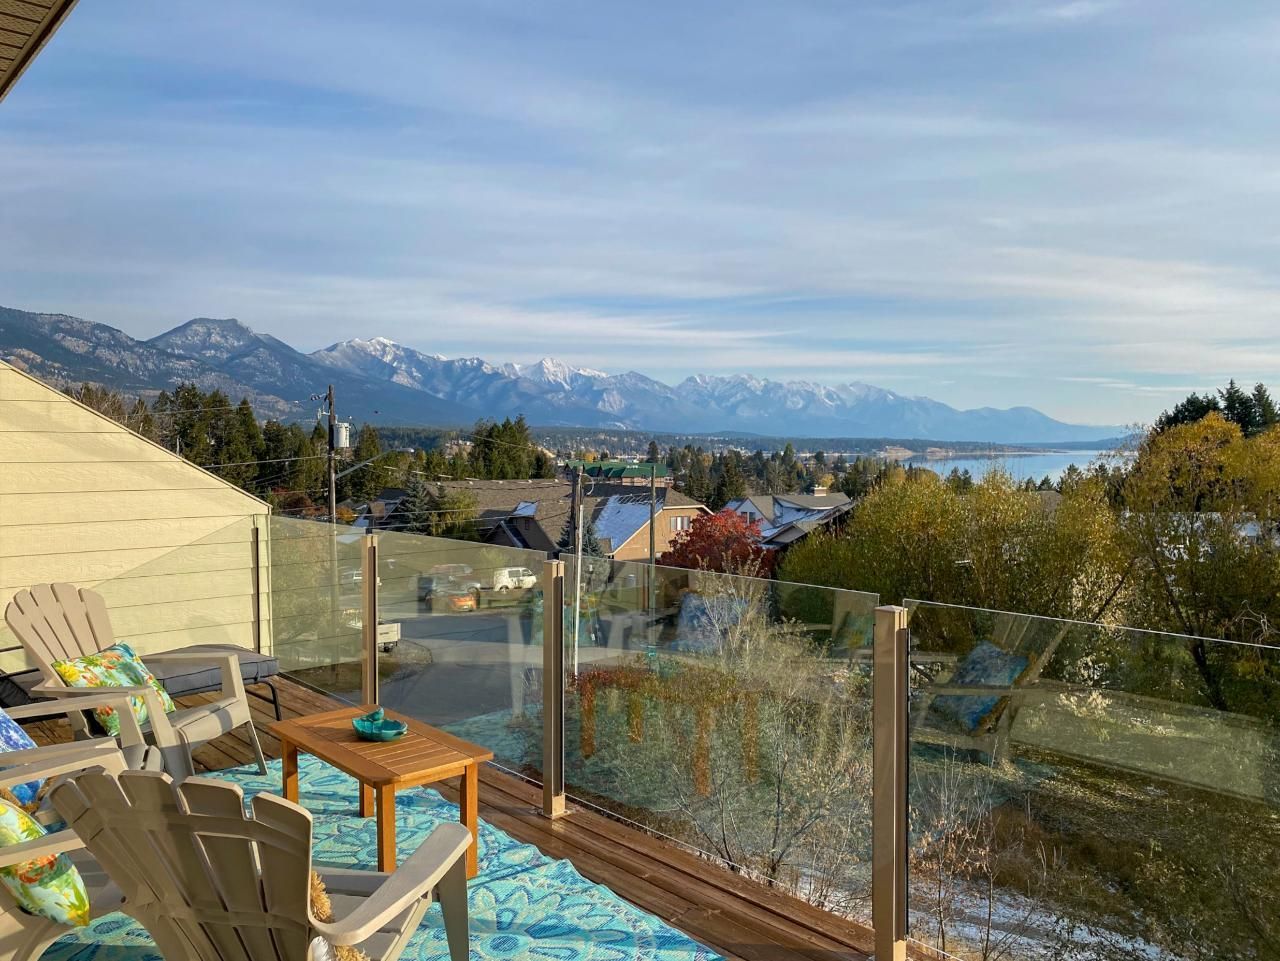 Private patio of Central Elegance, an Invermere BC Vacation Rental hosted by Aisling Baile Property Management.